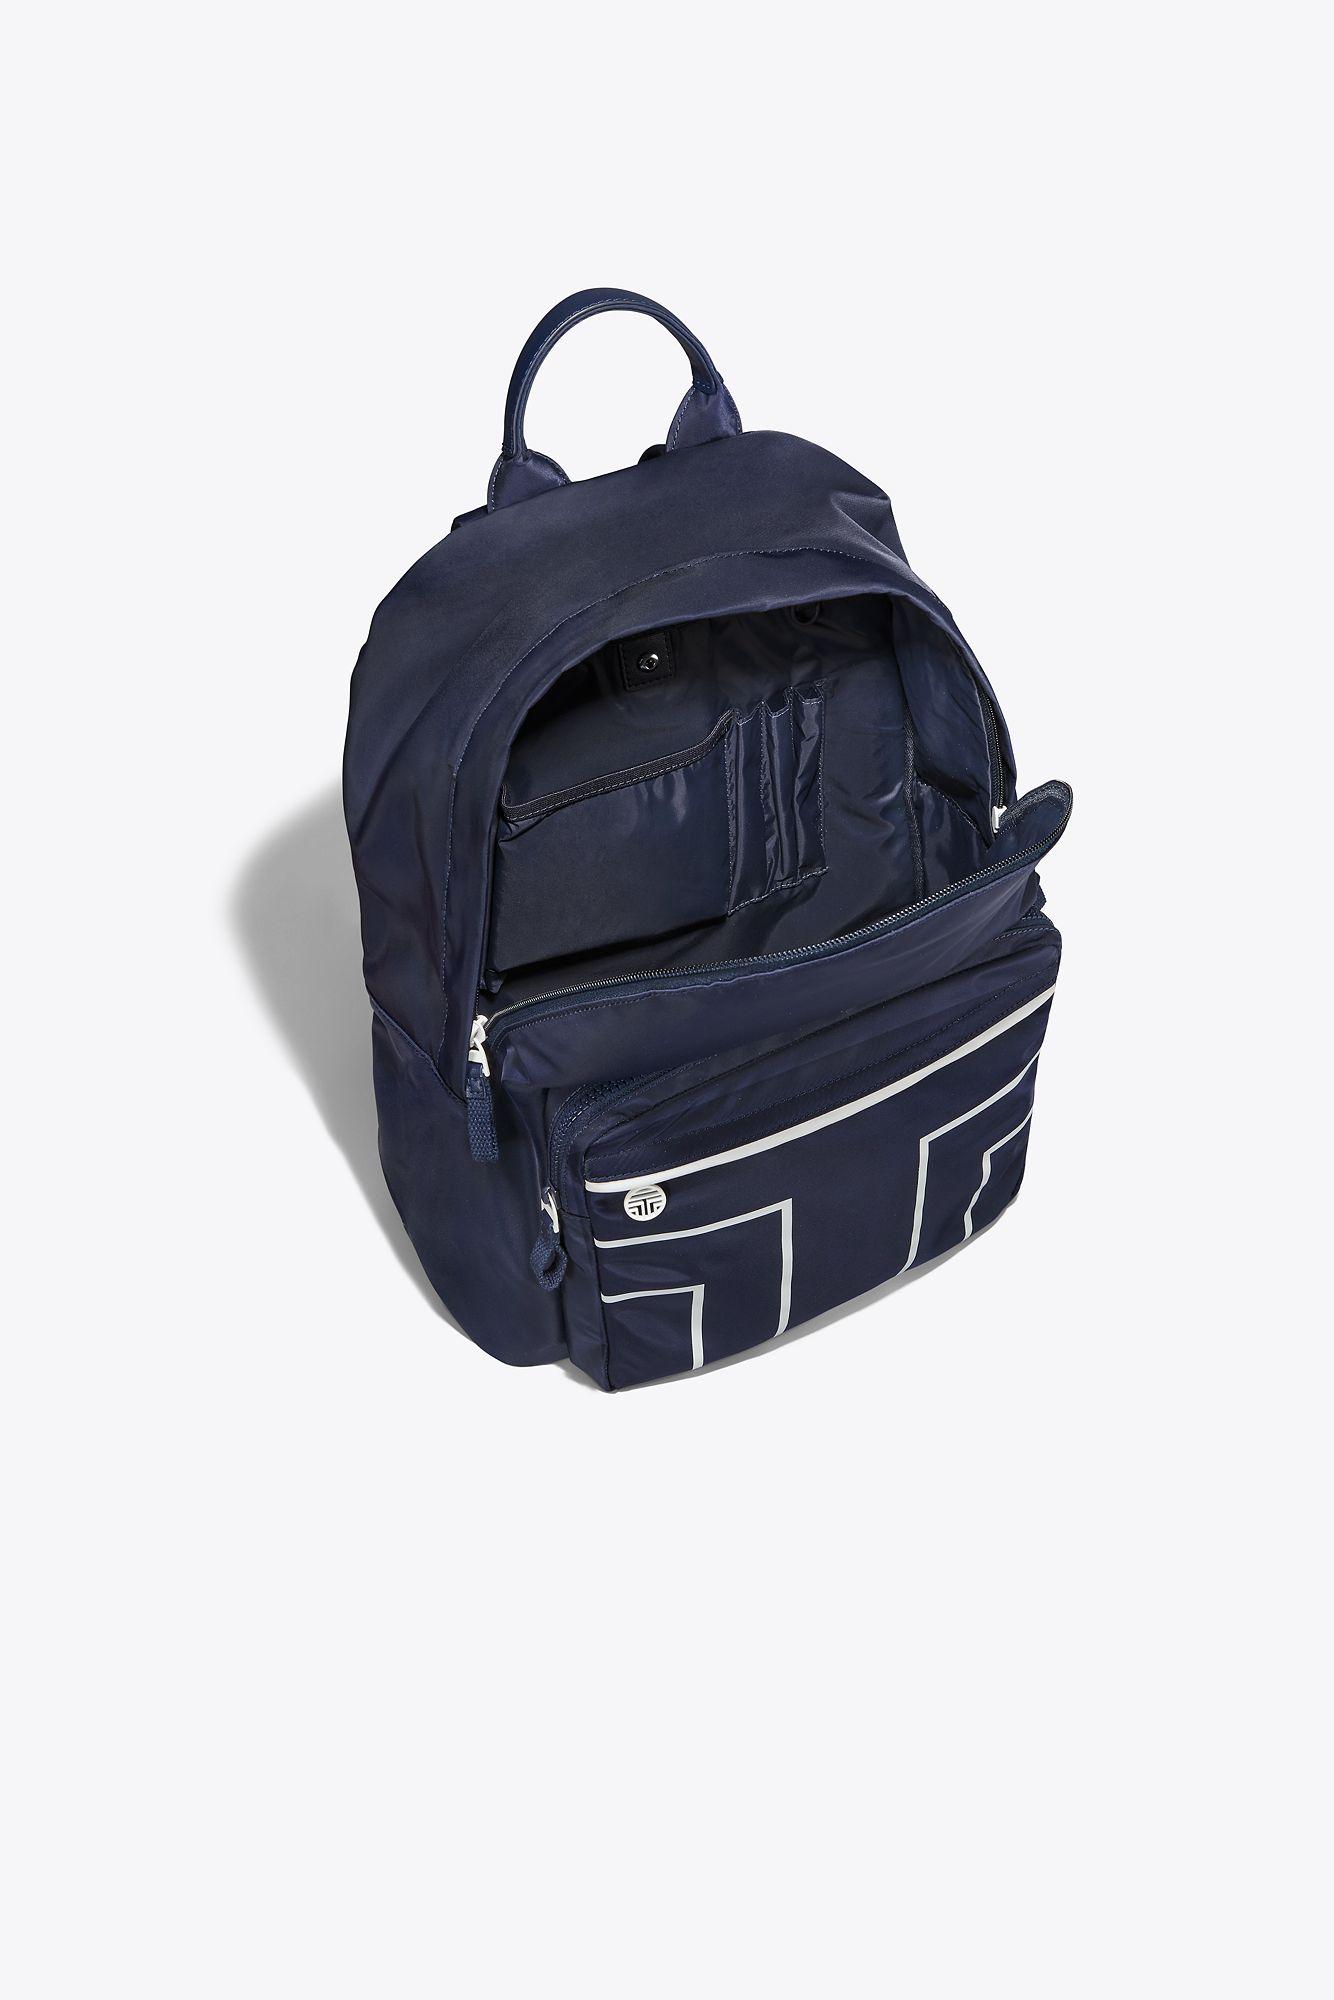 Tory Sport Synthetic Nylon Graphic-t Backpack in Blue - Lyst